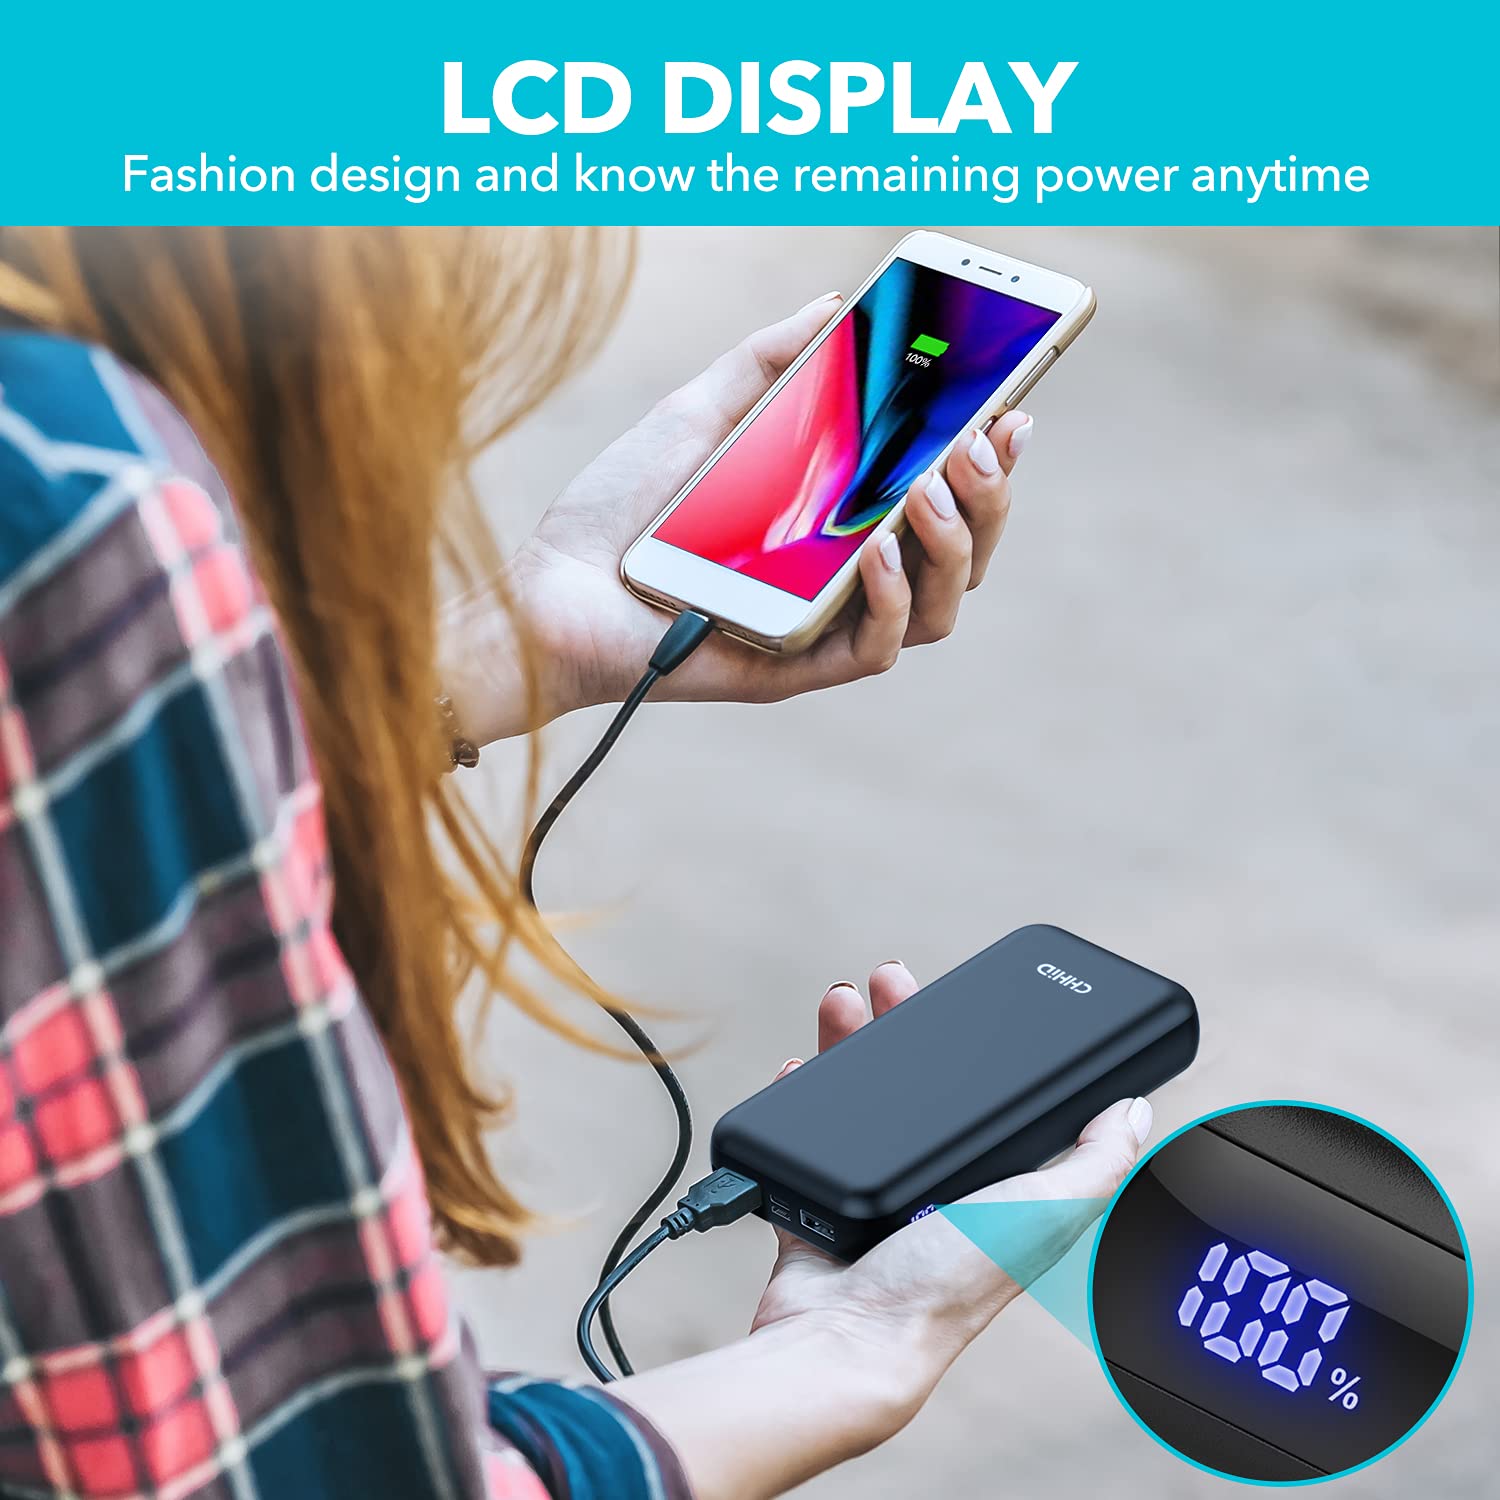 CHHID LCD Display Portable Charger Power Bank,26800mAh High-Capacity Dual USB Battery Pack, External Battery Cell Phone Charger Compatible with iPhone,Android etc.